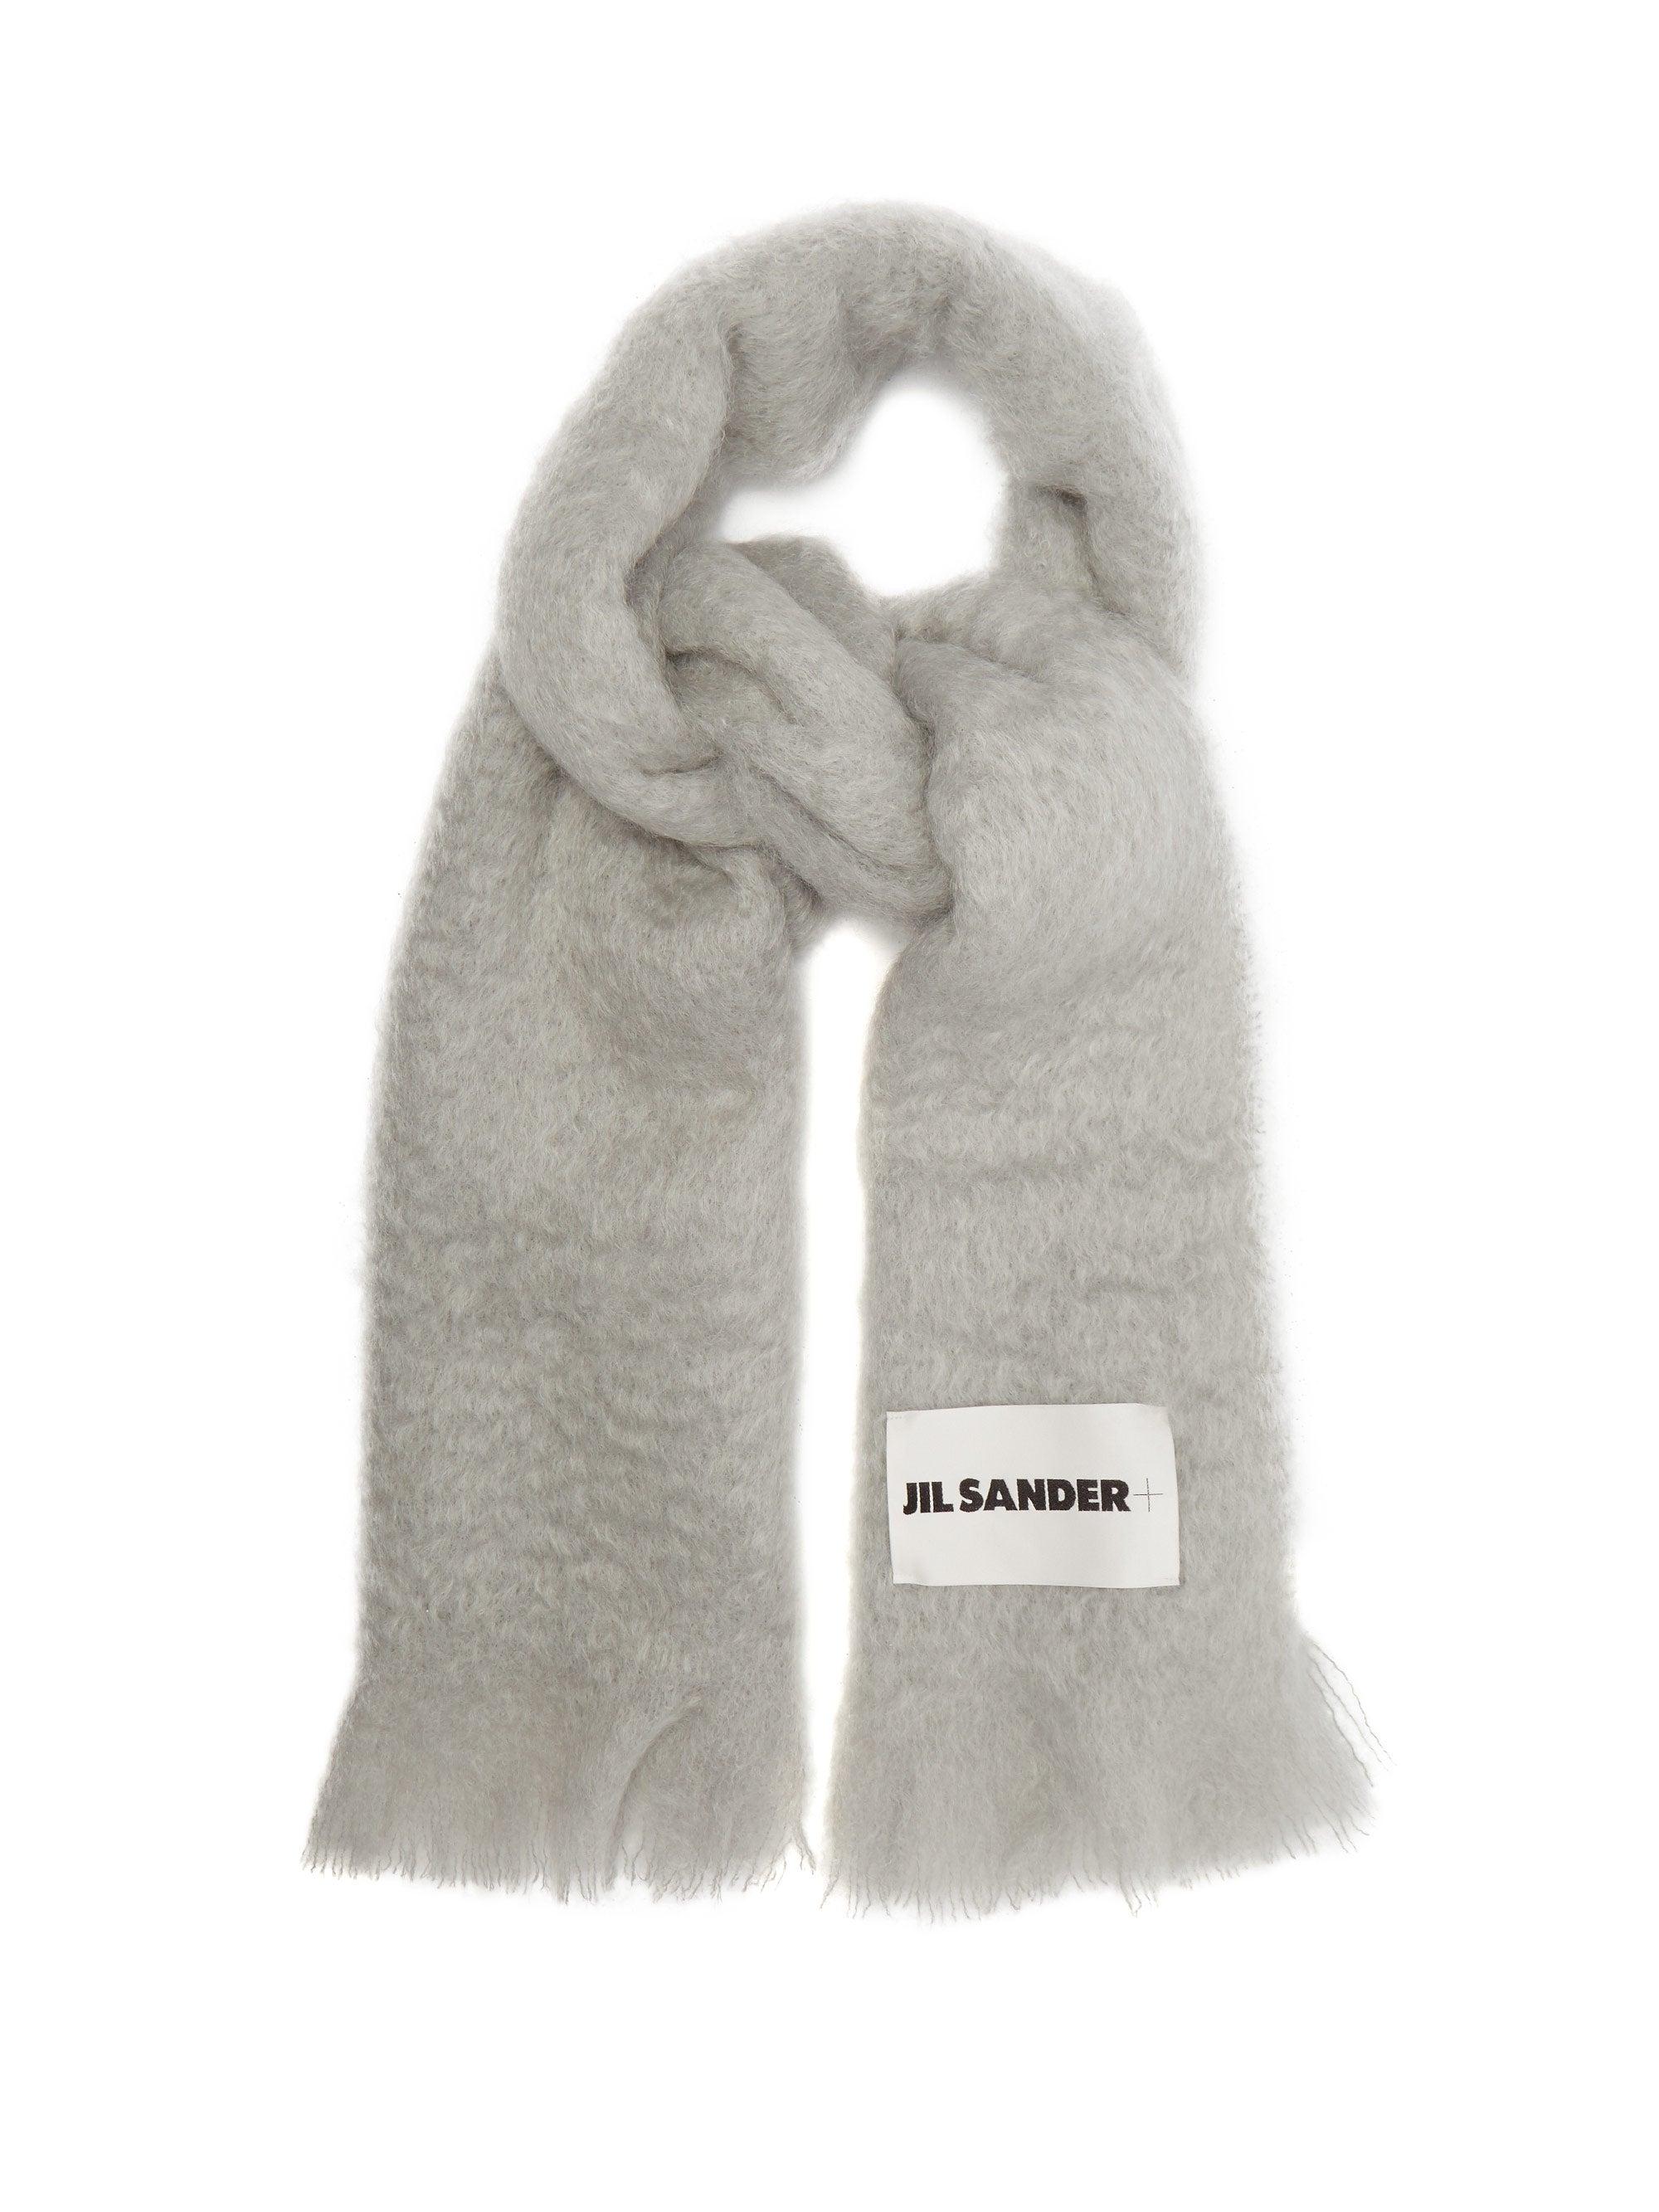 Jil Sander Cotton Fringed Mohair-blend Scarf in Grey (Gray) - Lyst